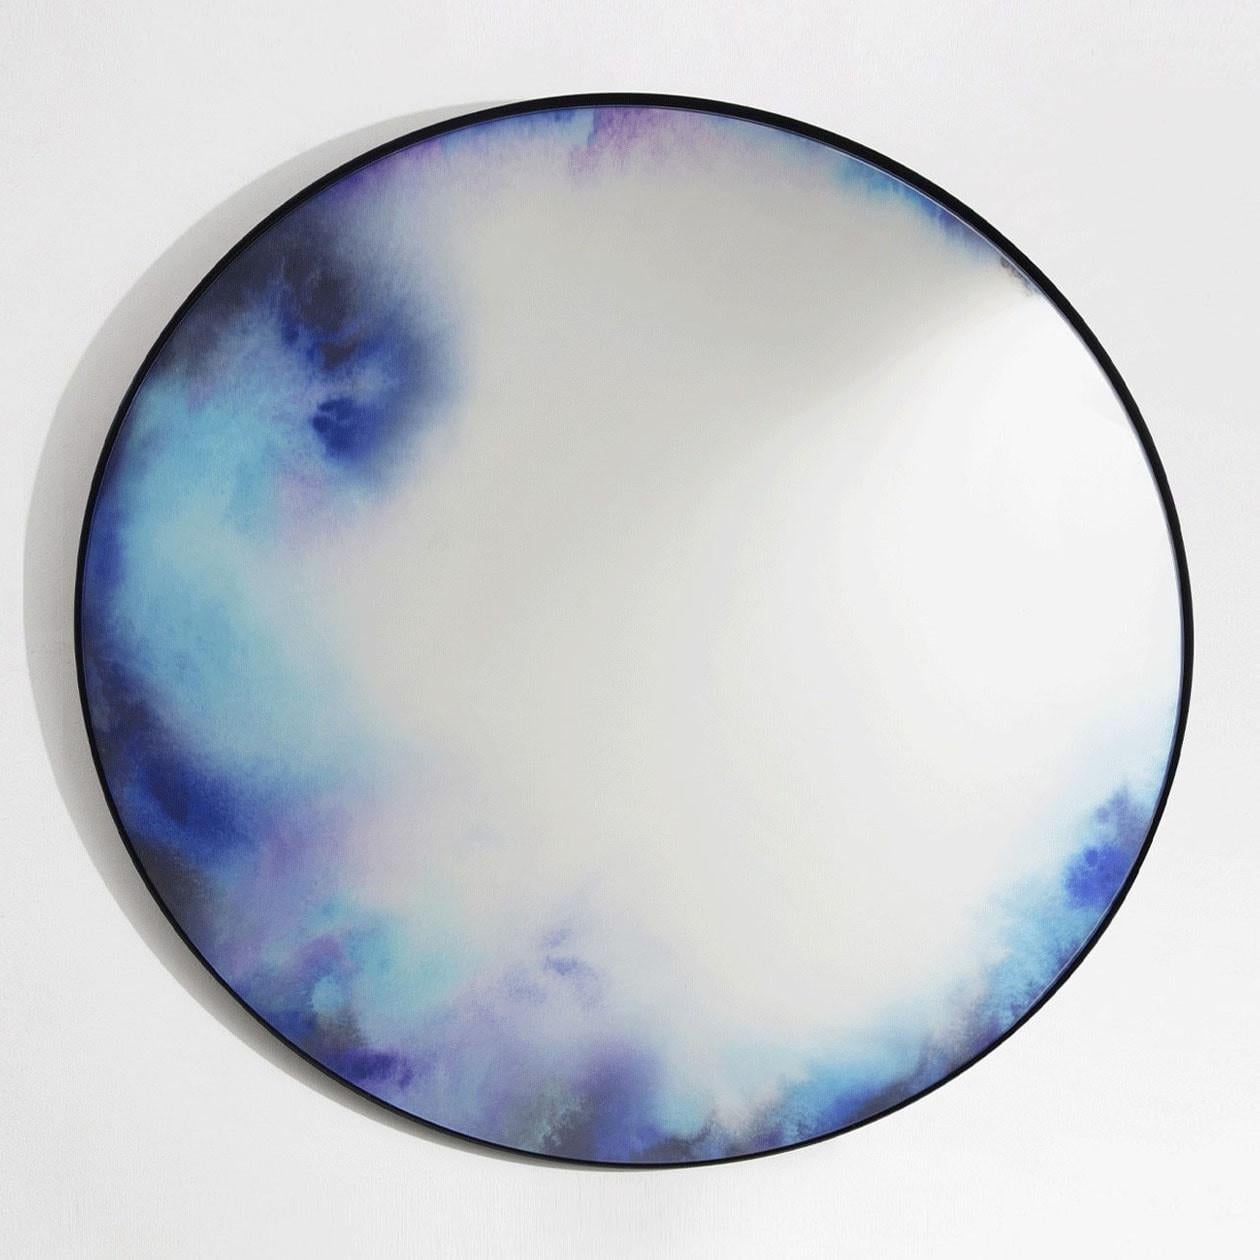 Petite Friture Extra Large Francis Wall Mirror in Black & Blue Watercolor by Constance Guisset, 2012

Francis collection starts with a painter brush resting in a glass of water, when watercolour pigments reveal shifting drawings. Constance Guisset